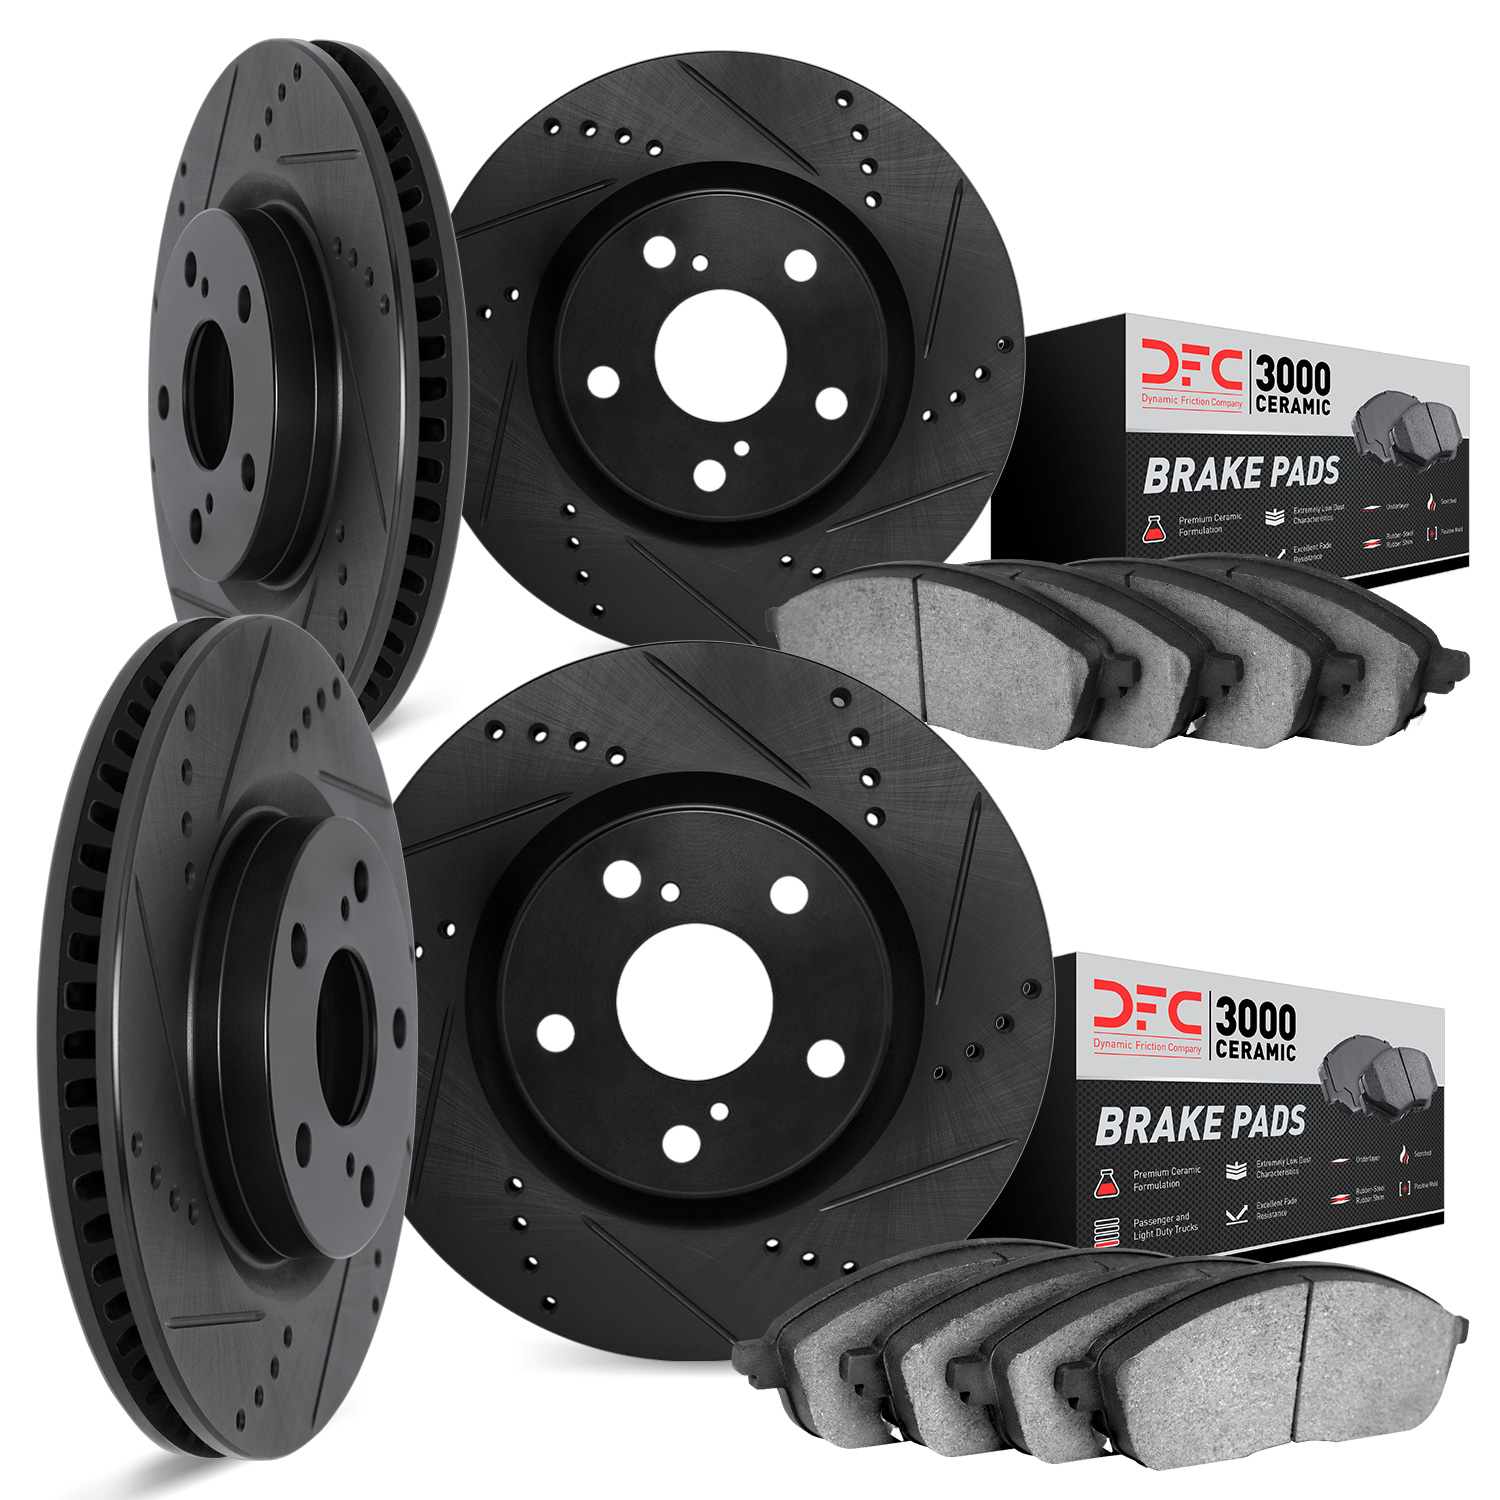 8304-13032 Drilled/Slotted Brake Rotors with 3000-Series Ceramic Brake Pads Kit [Black], 2008-2020 Subaru, Position: Front and R